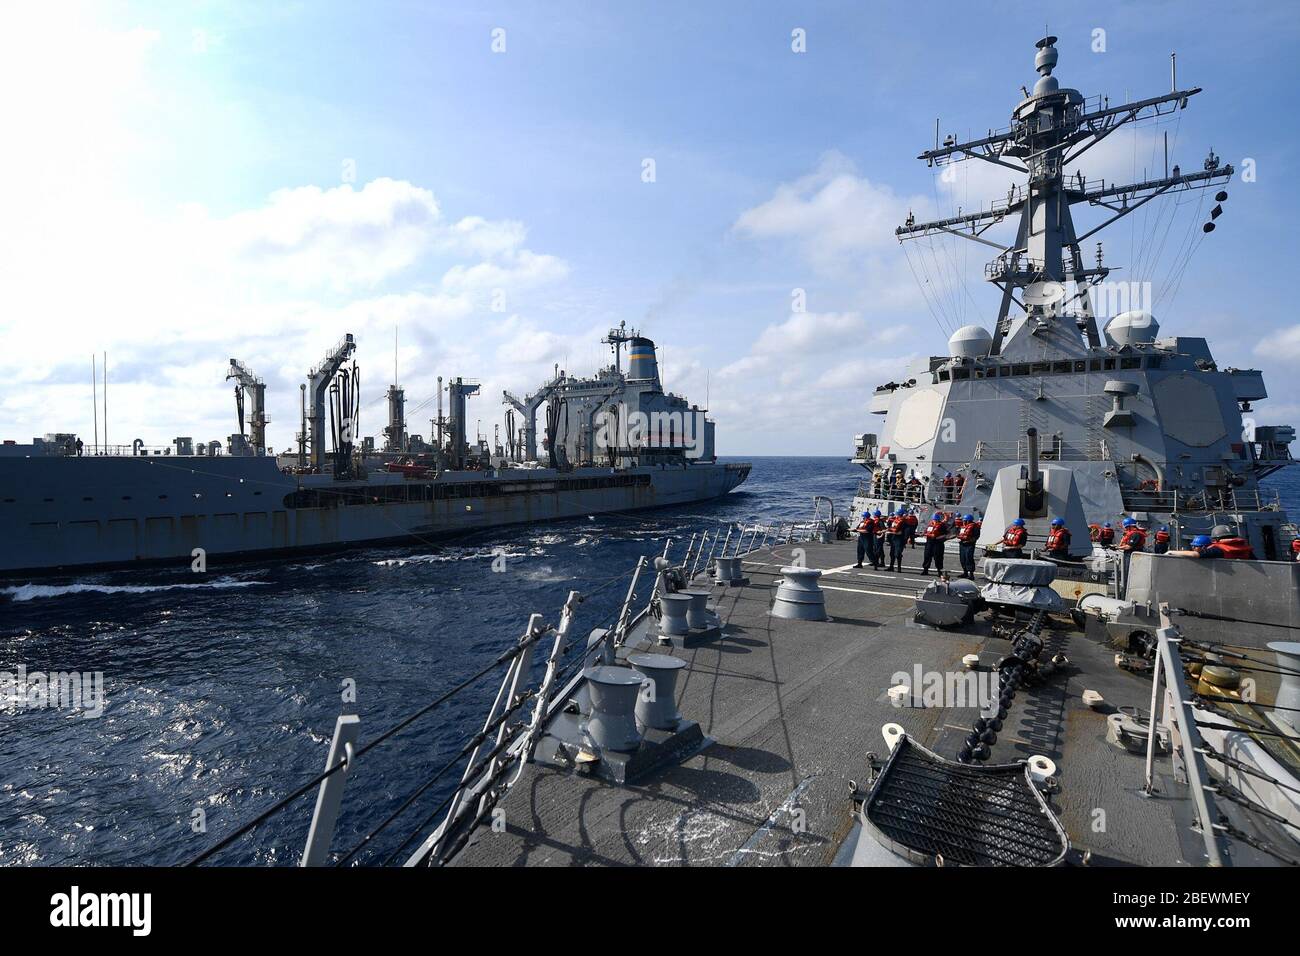 PACIFIC OCEAN (April 8, 2020) U.S. Navy Sailors heave line aboard the Arleigh Burke-class guided-missile destroyer USS Pinckney (DDG 91) during a replenishment-at-sea with the fleet replenishment oiler USNS Laramie (T-AO 203). Pinckney is deployed to the U.S. Southern Command area of responsibility to support Joint Interagency Task Force South’s mission, which includes counter illicit drug trafficking in the Caribbean and Eastern Pacific. (U.S. Navy photo by Mass Communication Specialist 3rd Class Erick A. Parsons) Stock Photo